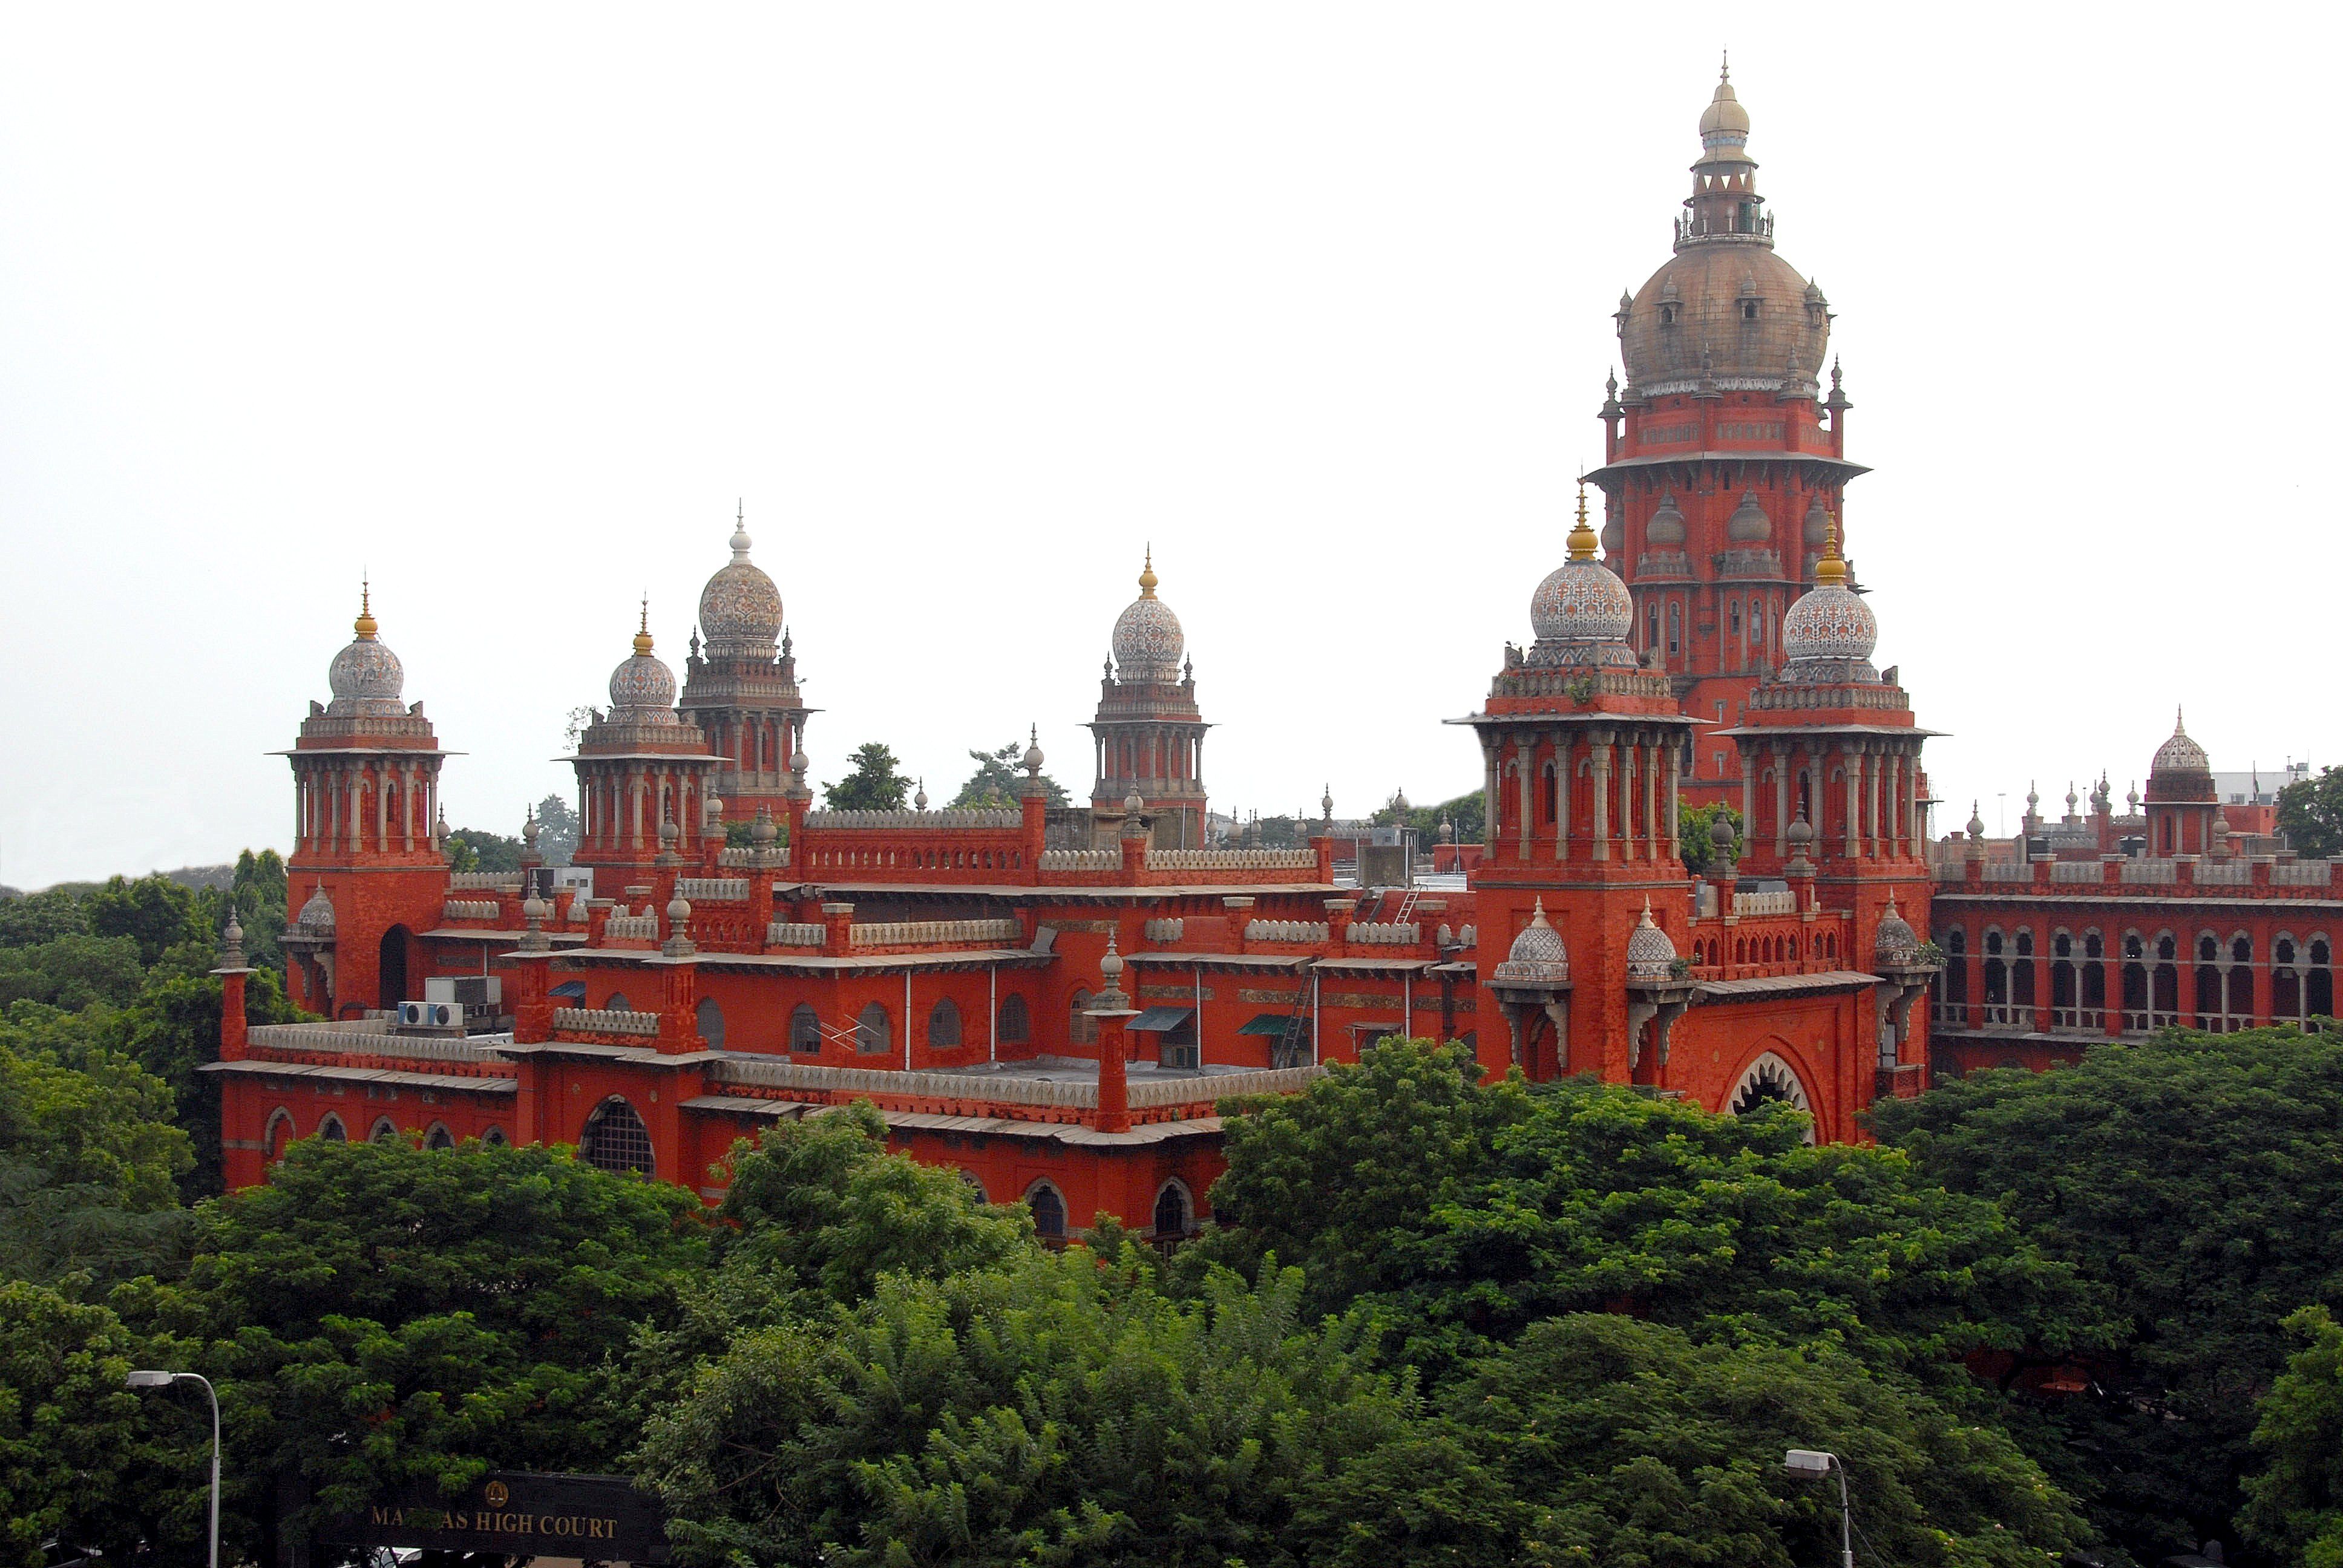 Cancel the check fraud case against the businessman? Madras High Court order